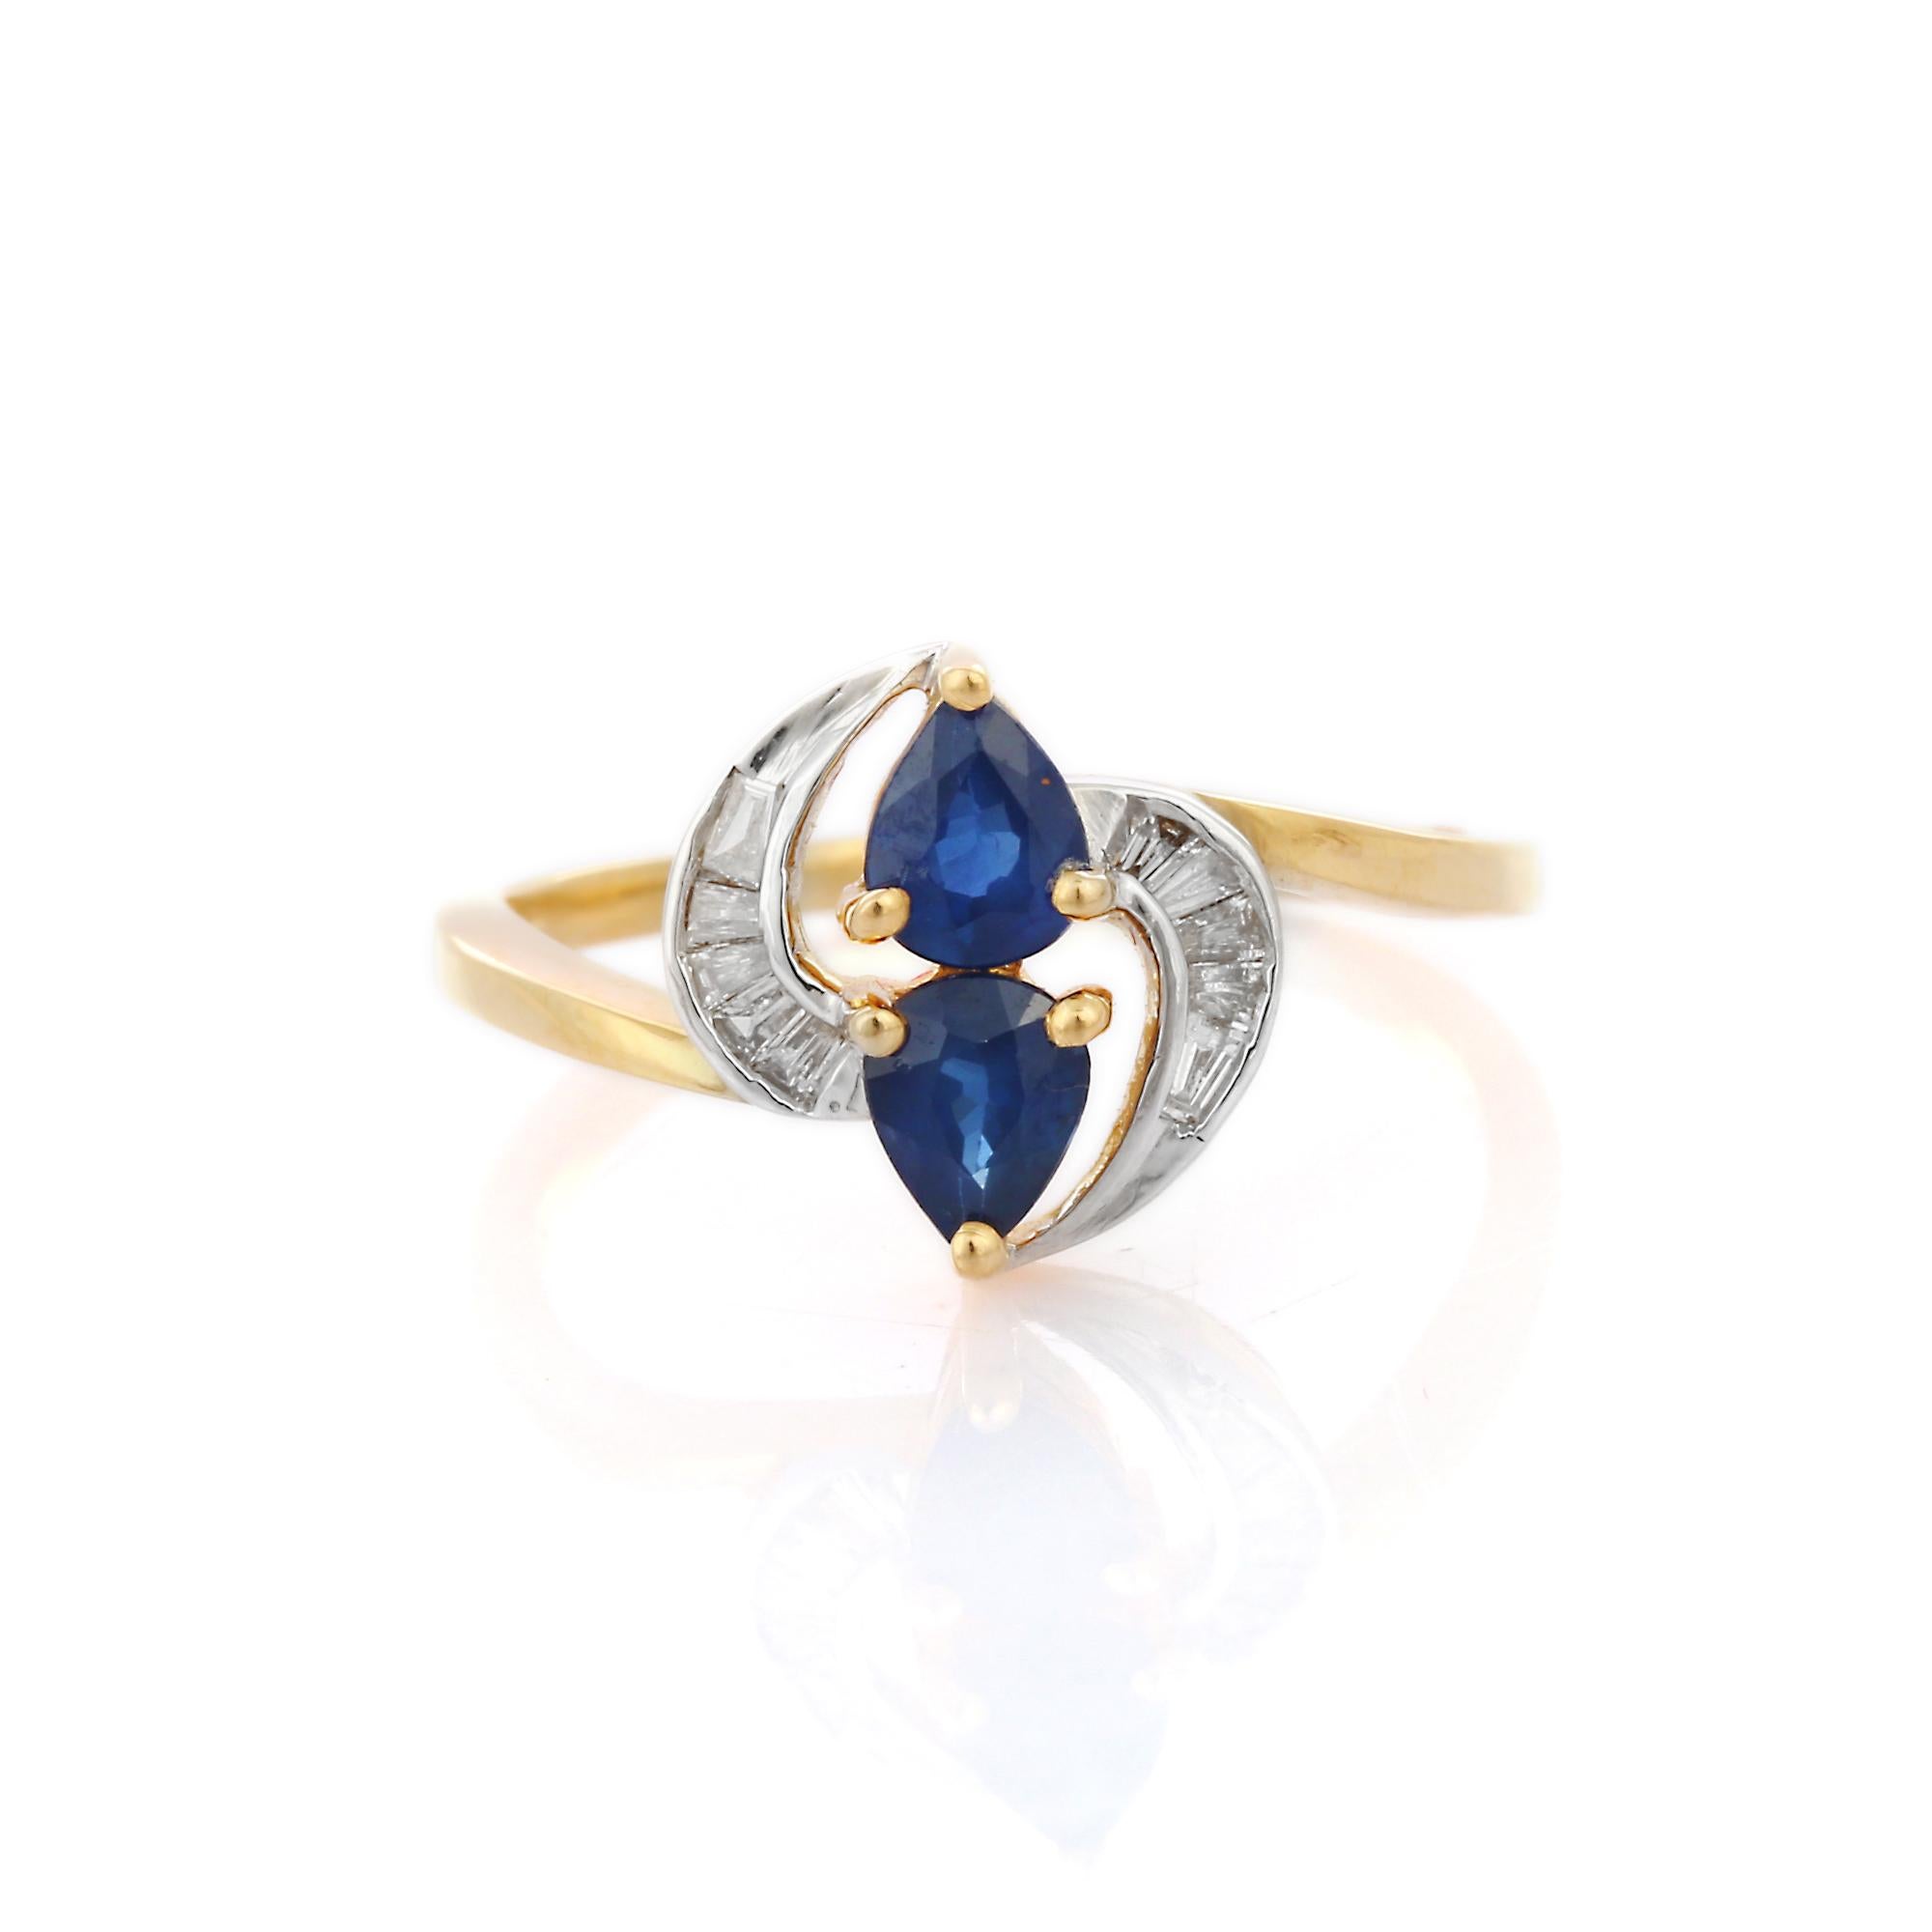 For Sale:  Natural Blue Sapphire Bridal Ring in 18K Yellow Gold with Diamonds 5